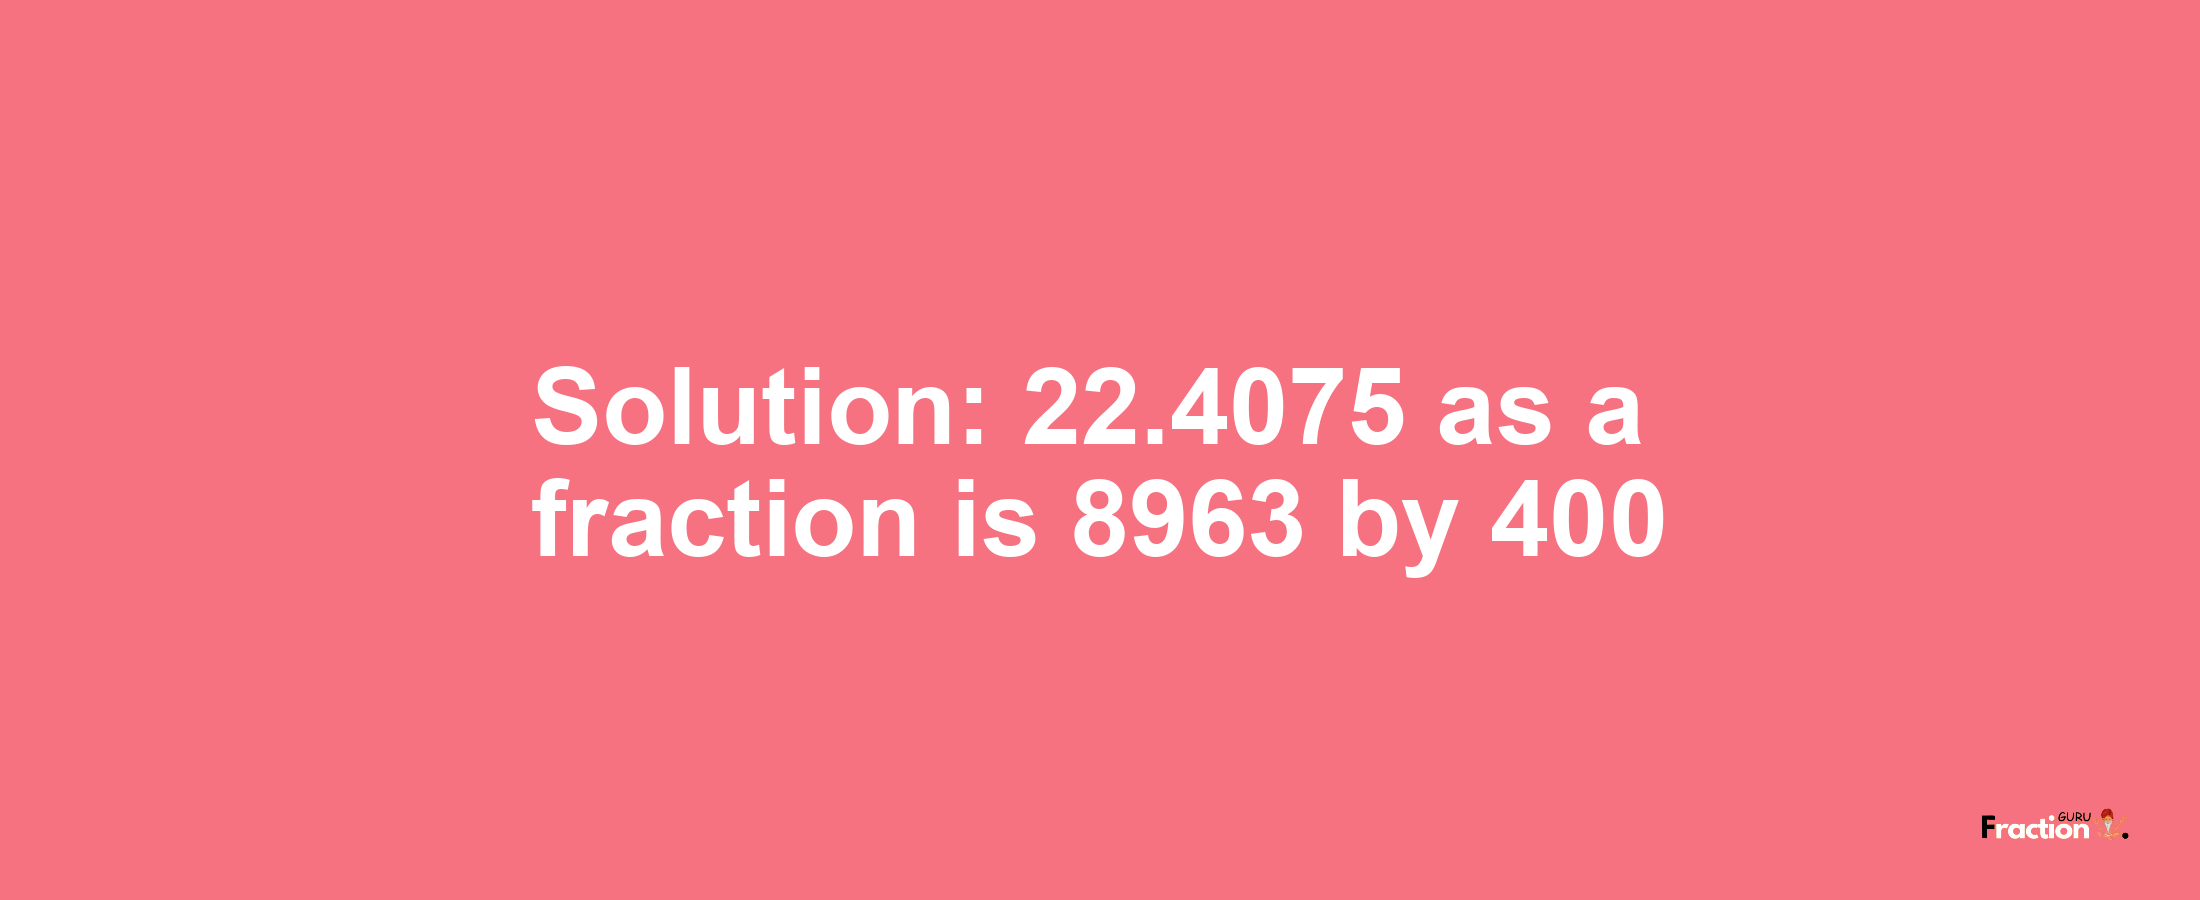 Solution:22.4075 as a fraction is 8963/400